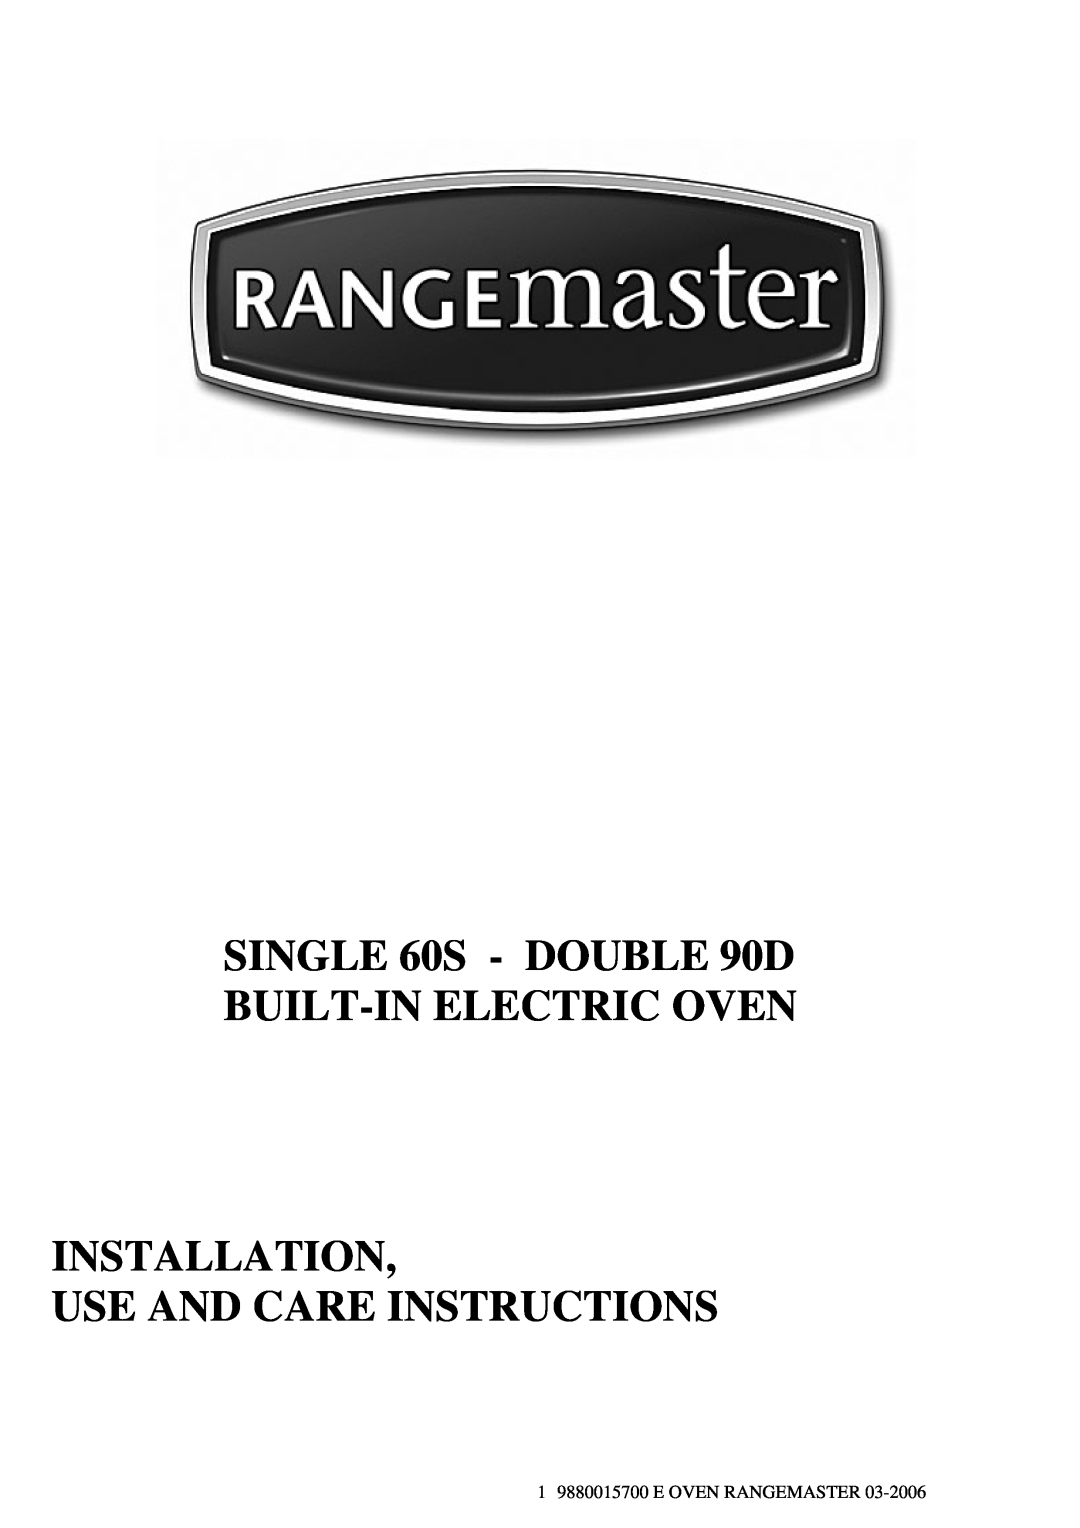 Rangemaster manual SINGLE 60S - DOUBLE 90D BUILT-INELECTRIC OVEN, Installation Use And Care Instructions 